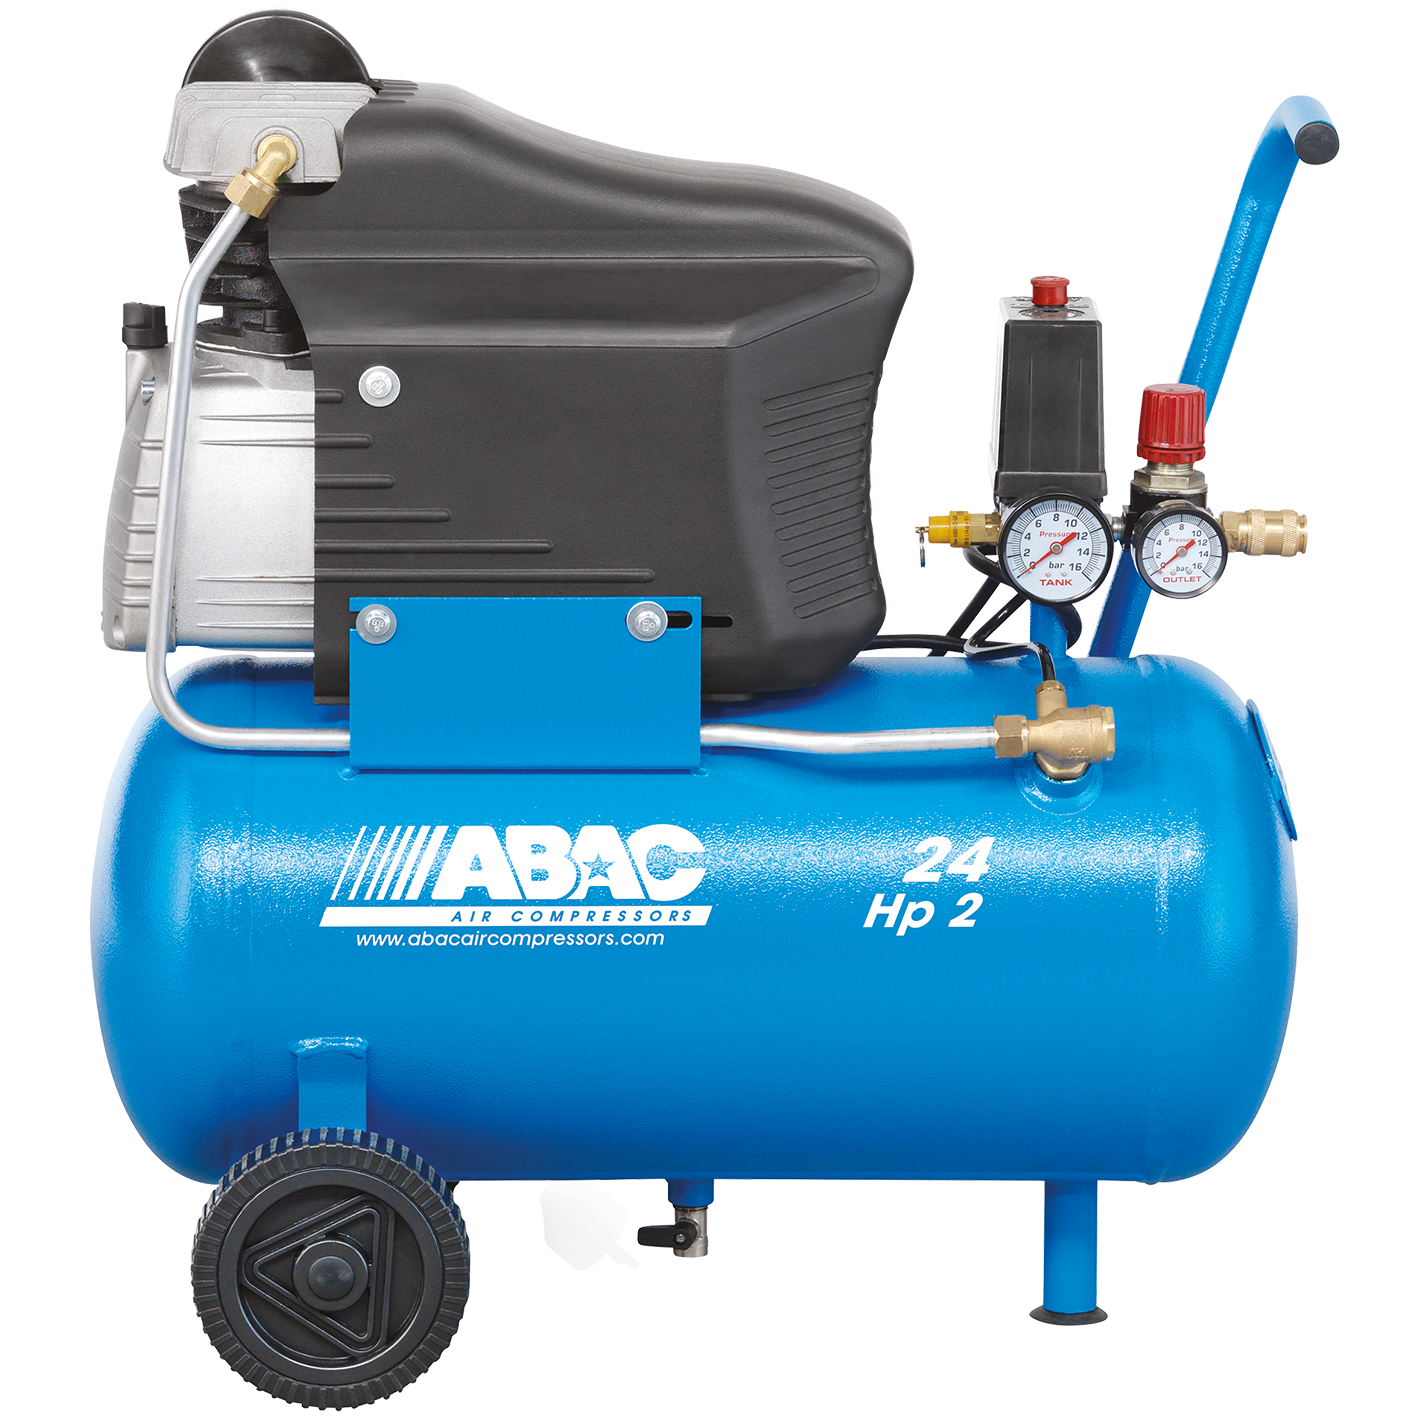 UK Suppliers of Direct Drive Compressors